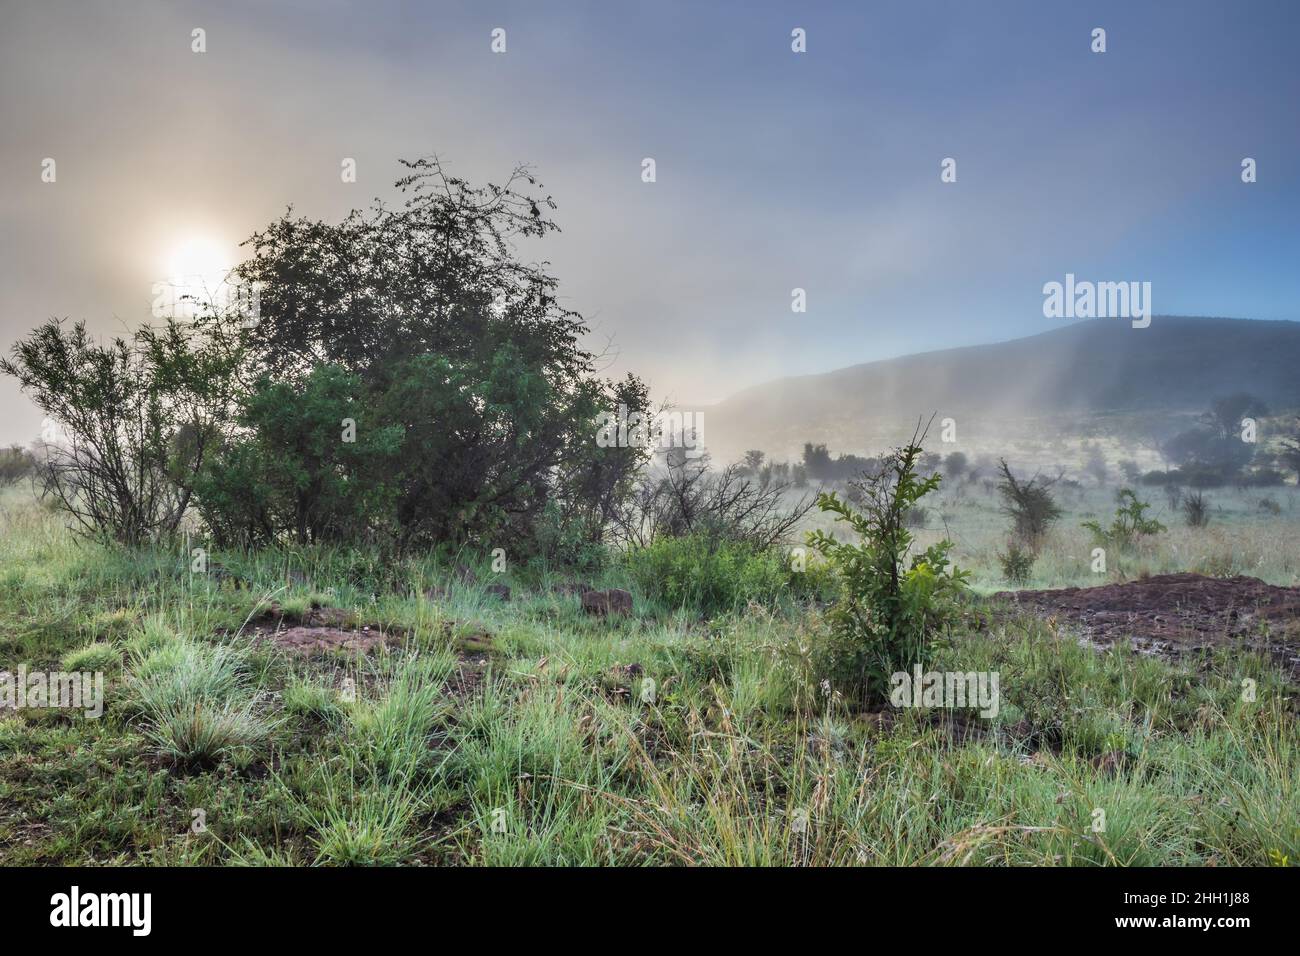 A wet Landscape view of mountains, brown and green savanna grassland covered in water drops and rain puddles after a rainstorm, Pilanesburg Stock Photo